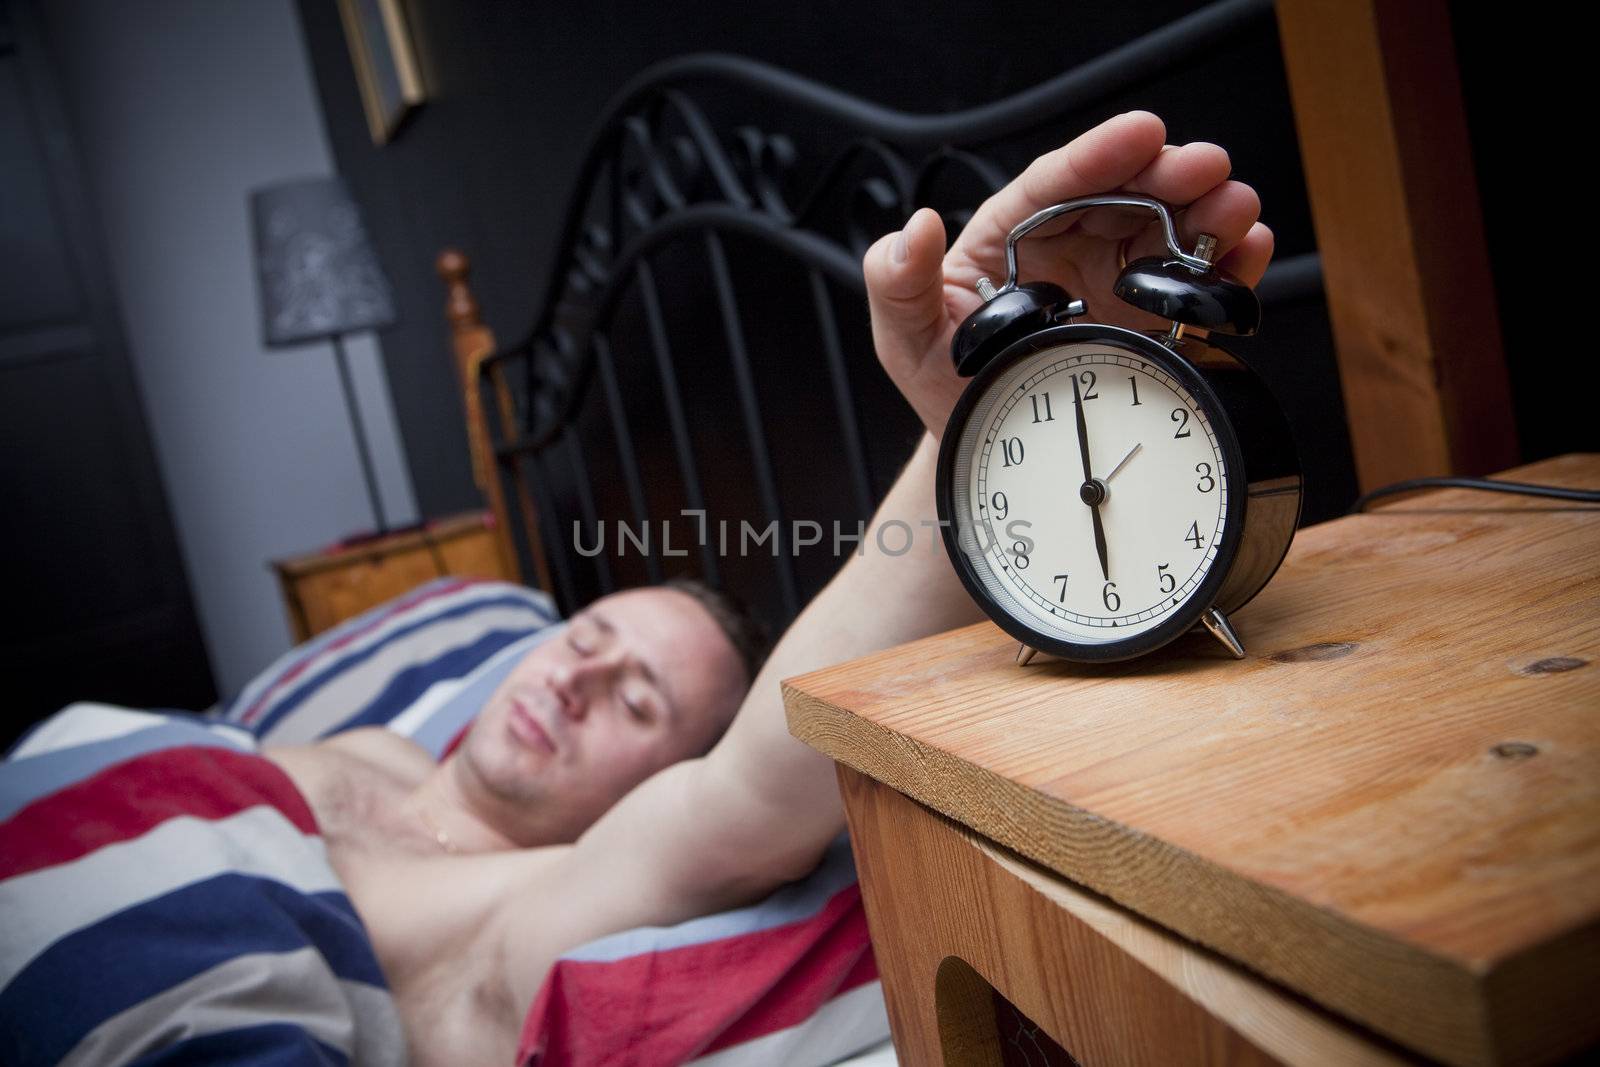 Man waking up in the morning